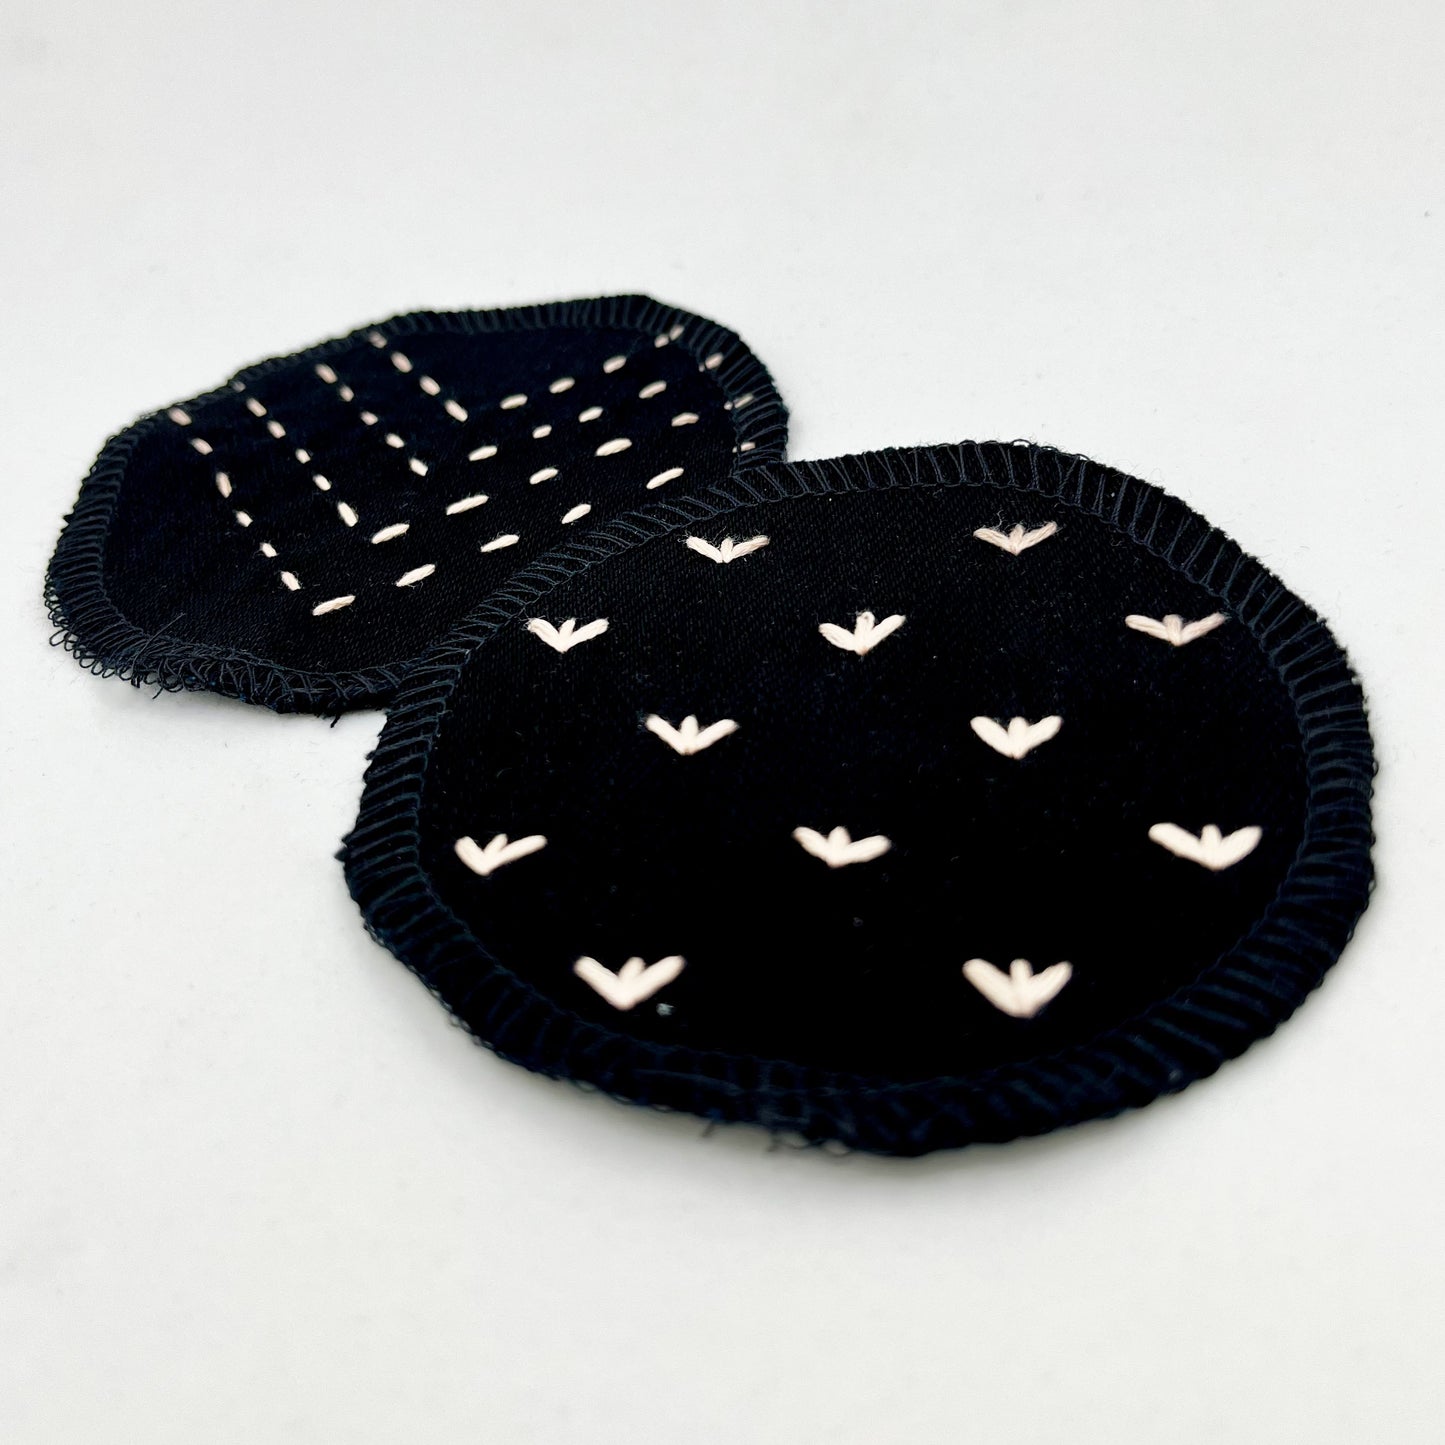 close up angled view of two circle shaped patches made out of black denim, with overlocked edges, one with stitches in peach that look like sprouts or birds feet, the other with rows of running stitches in a chevron pattern